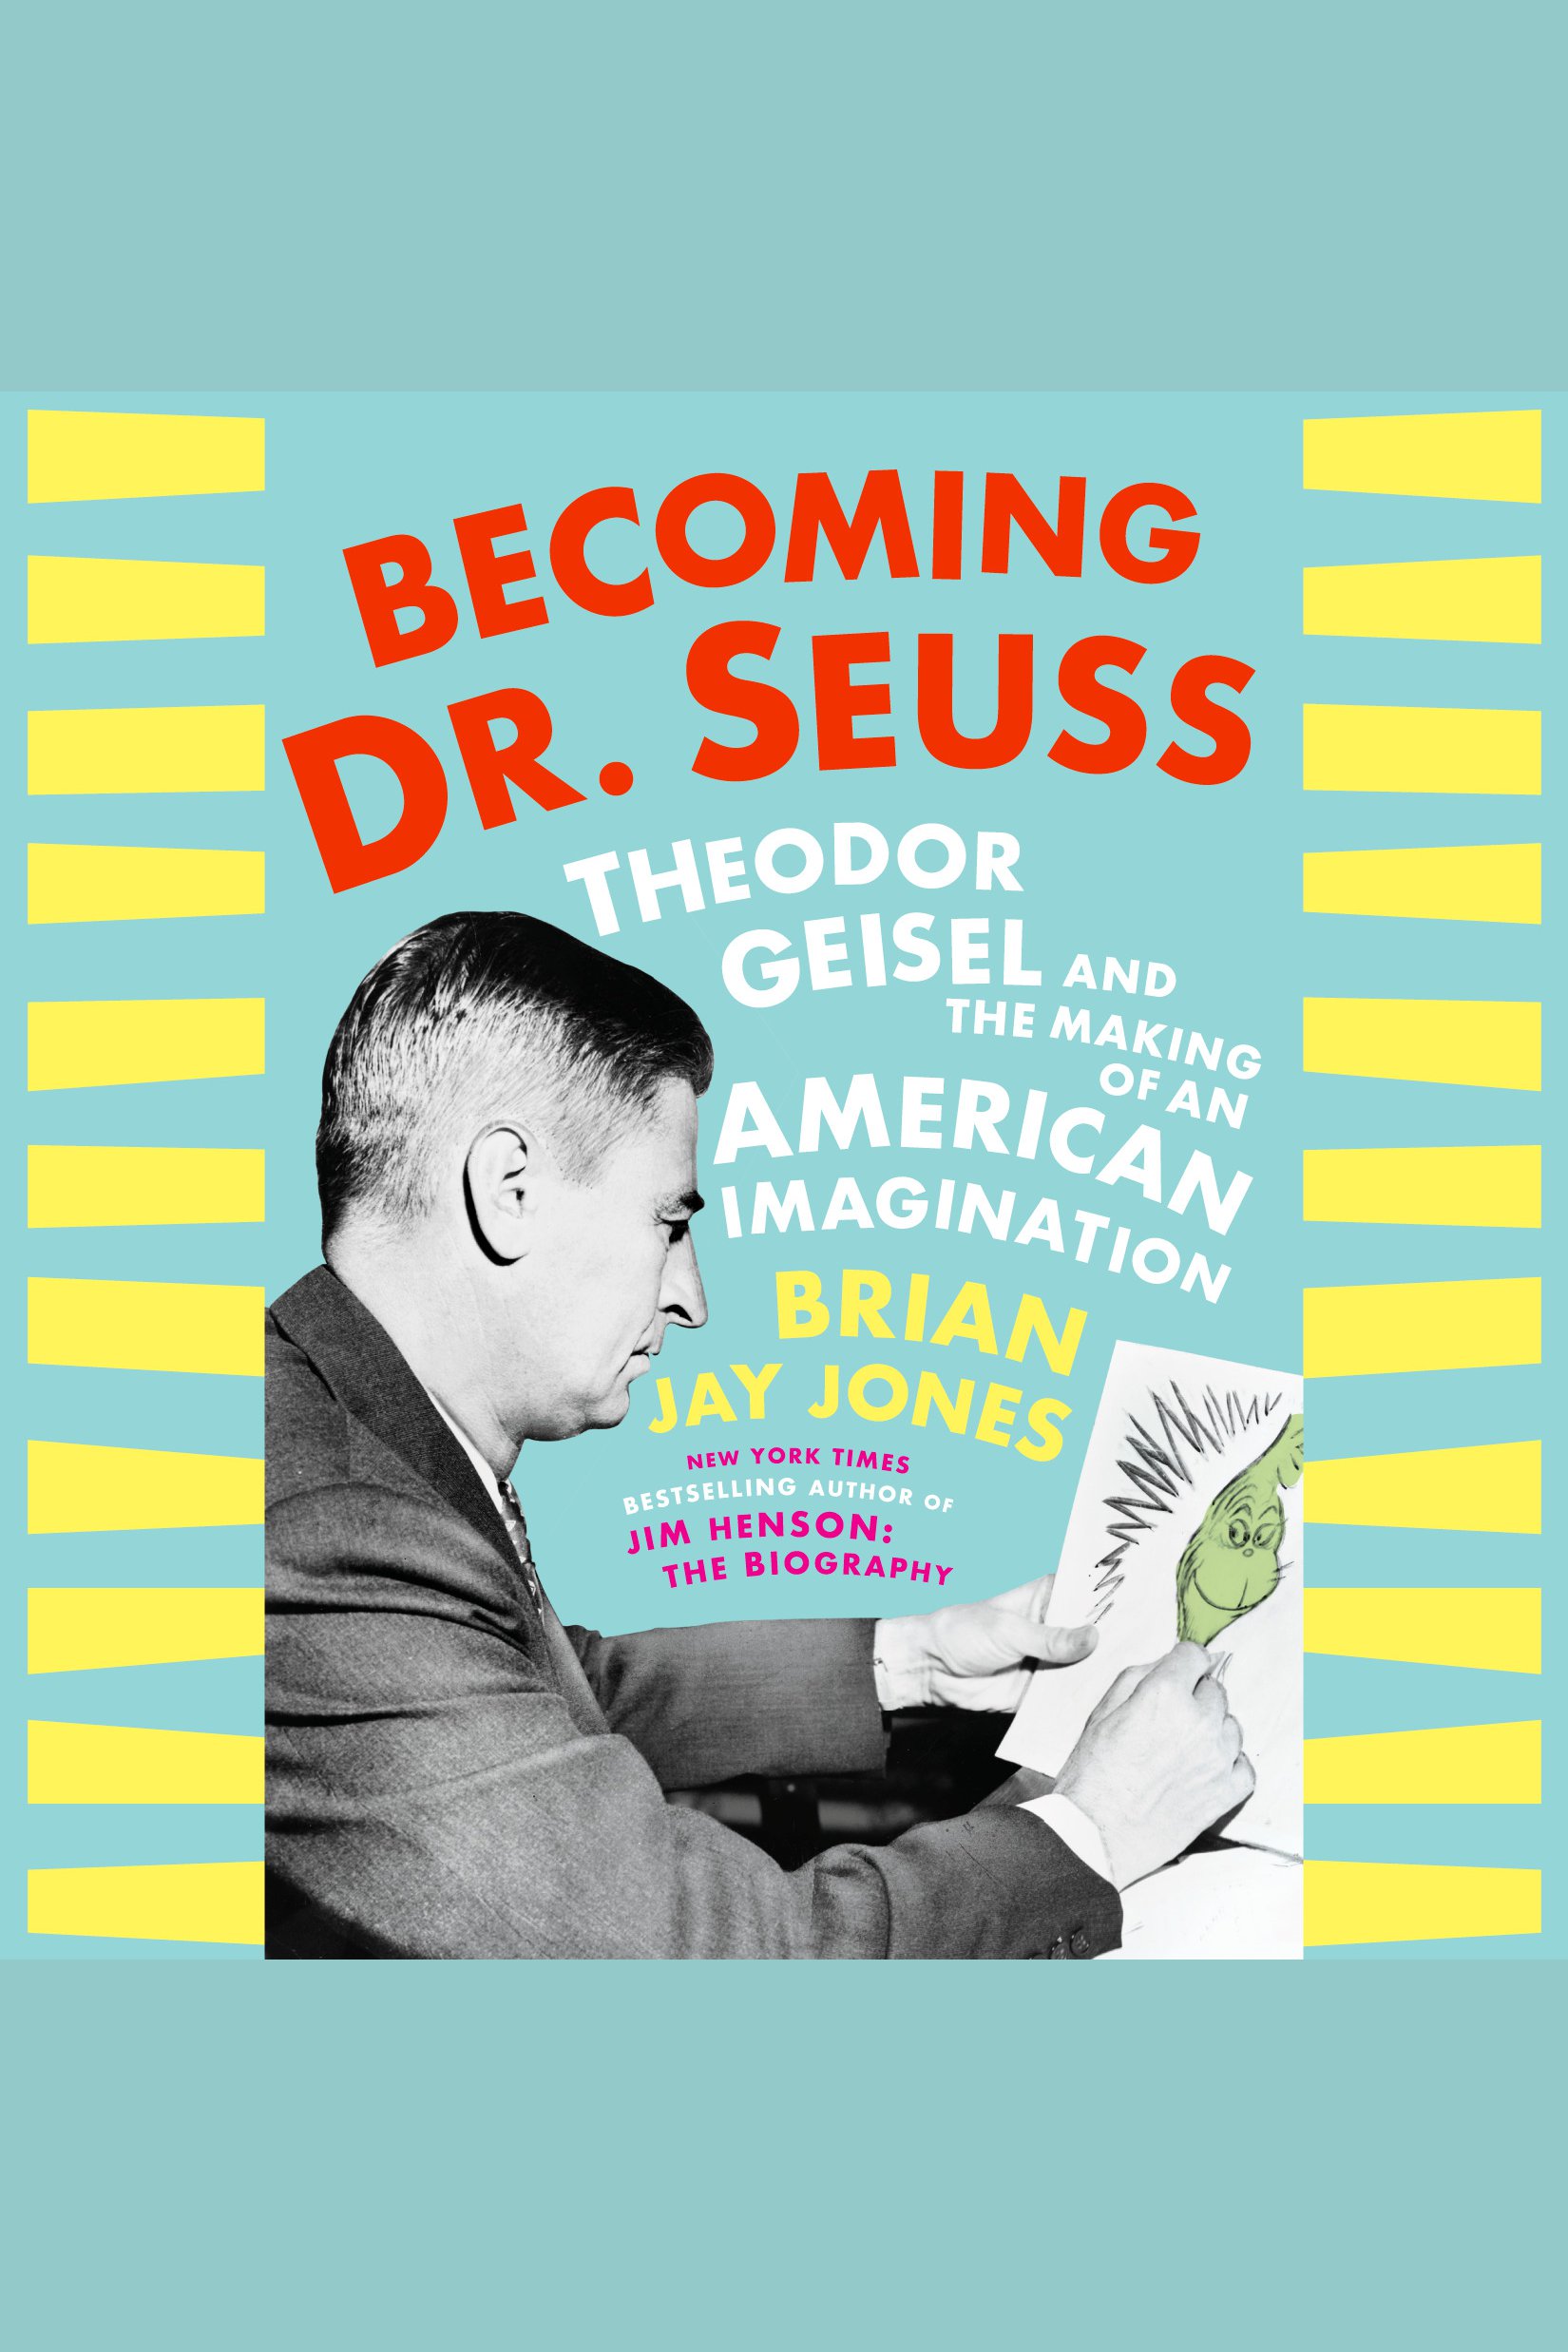 Umschlagbild für Becoming Dr. Seuss [electronic resource] : Theodor Geisel and the Making of an American Imagination